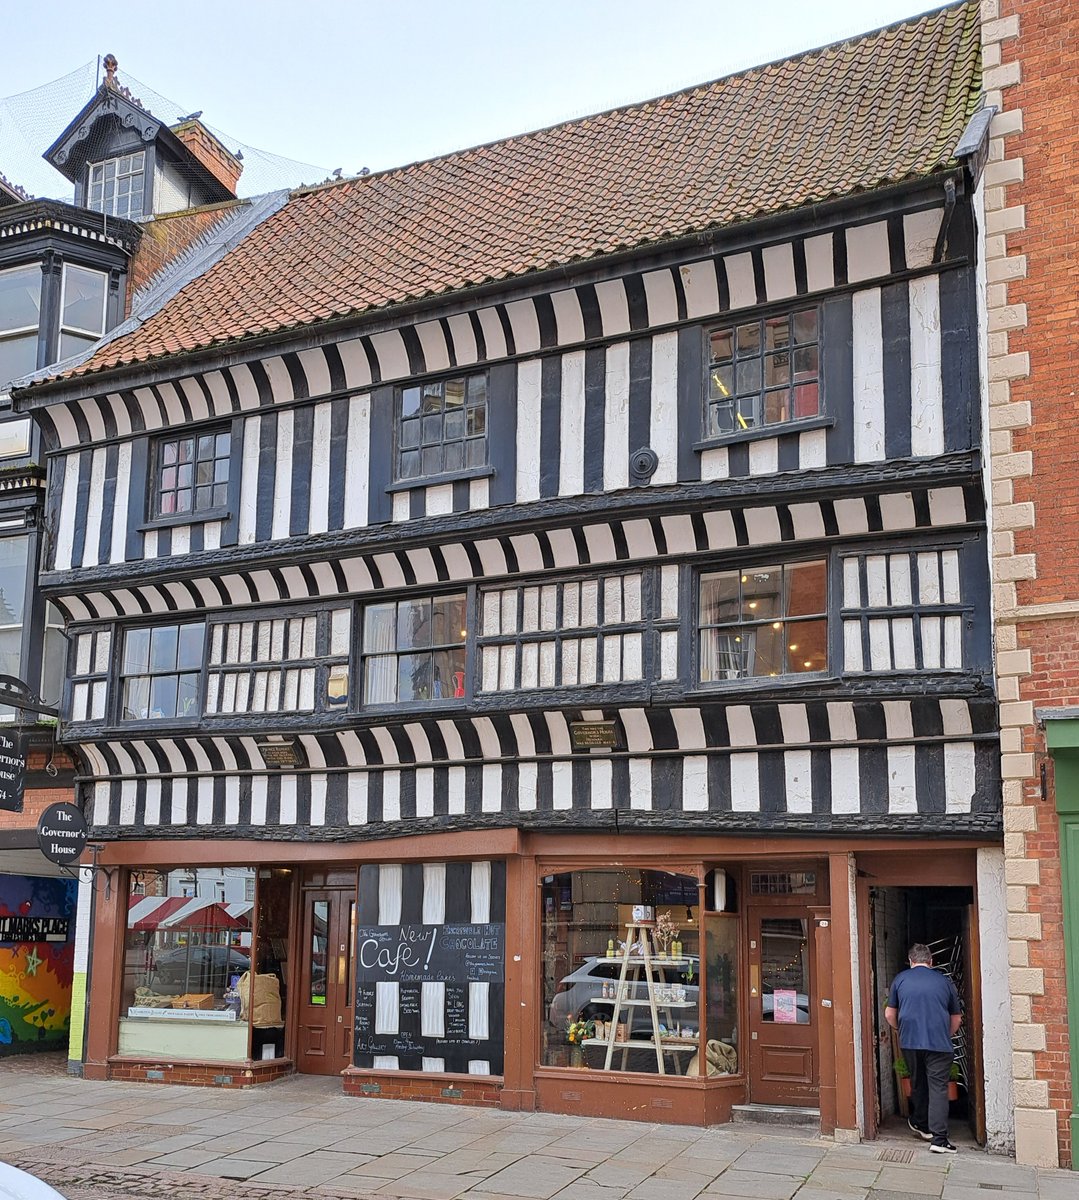 'Long-drop toilet viewed a million times,' says the new coffee shop, keen to attract trade to Newark's 'Governor's House' (in the Civil War). It was old then, having been built in 1474. Listed Grade I. The 15th-century garderobe is on the first floor.